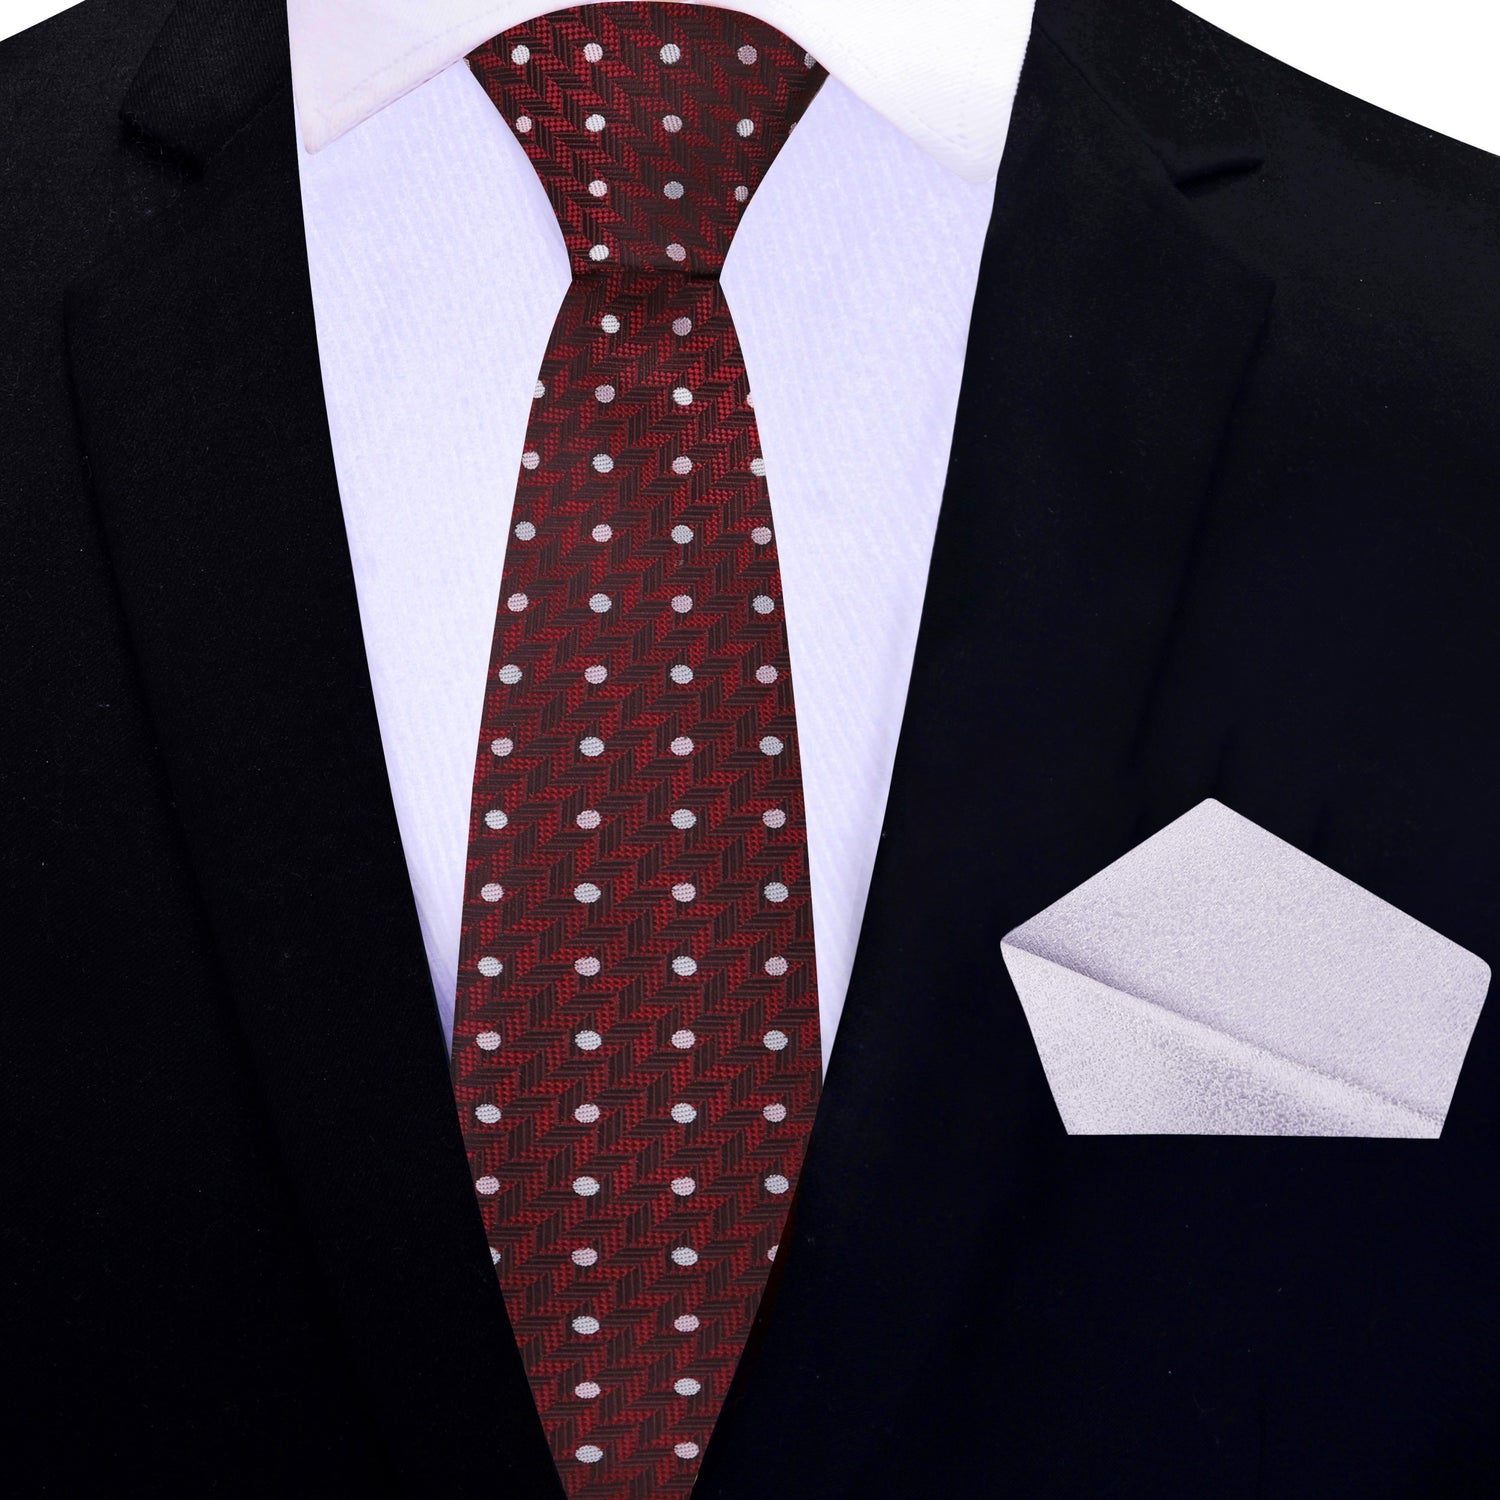 Thin Tie: Deep Red Herringbone with Dots Silk Necktie and Accenting Silver Square